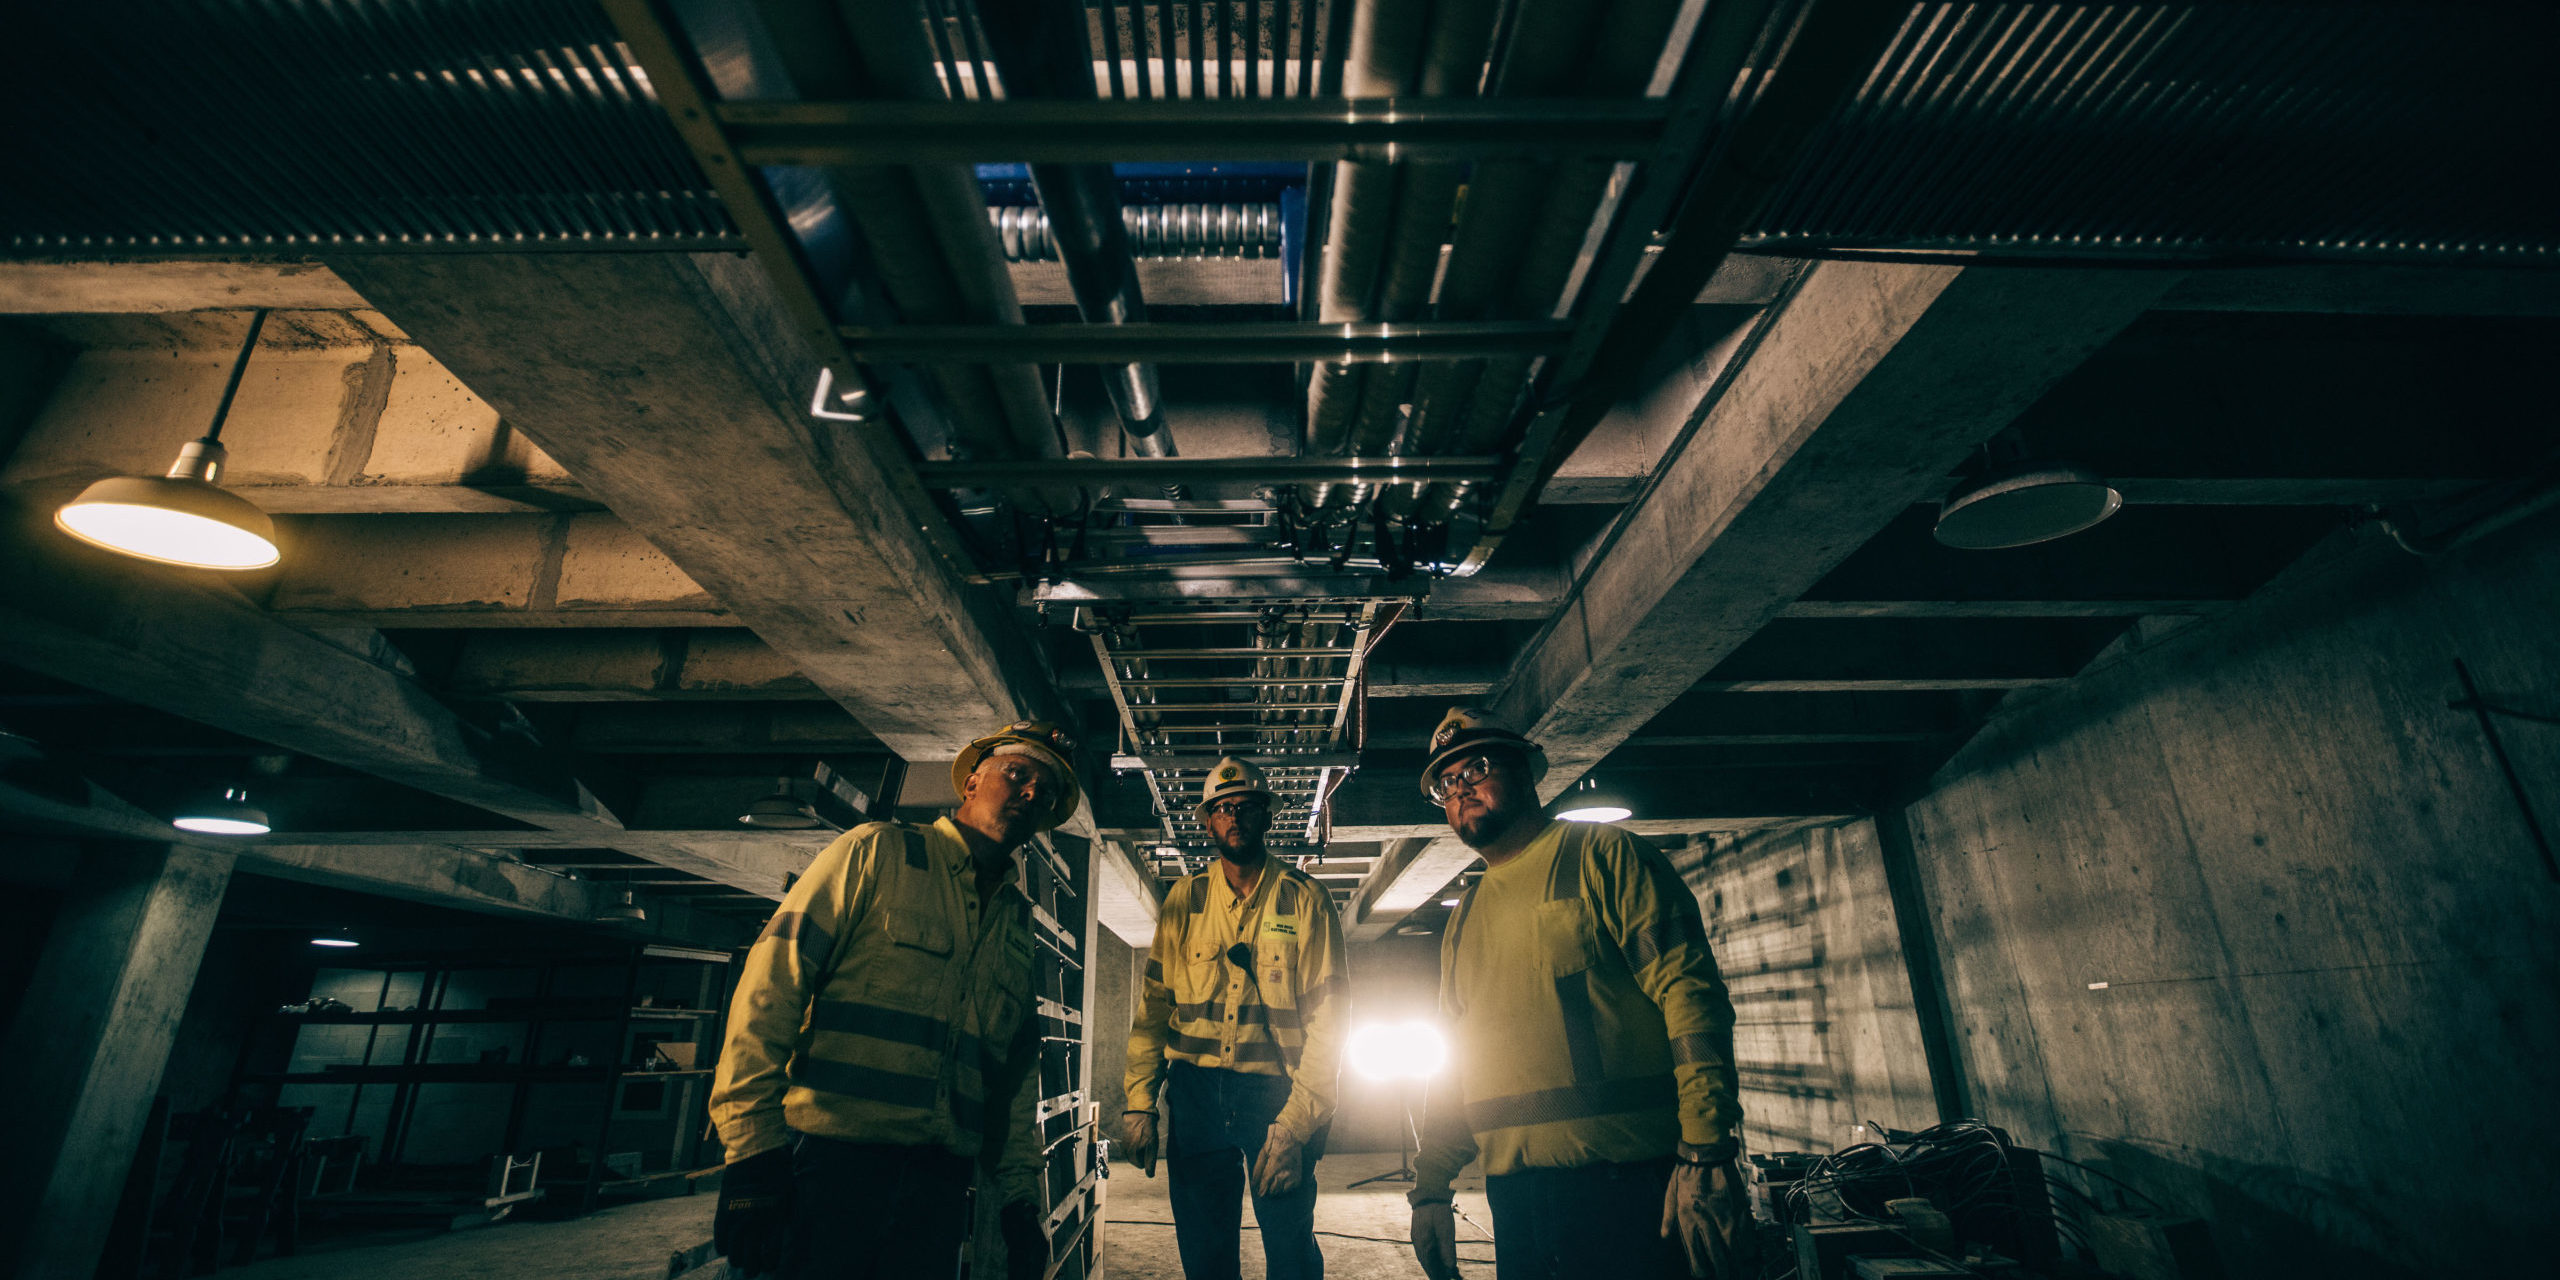 Three New River Electrical employees working in a underground station.